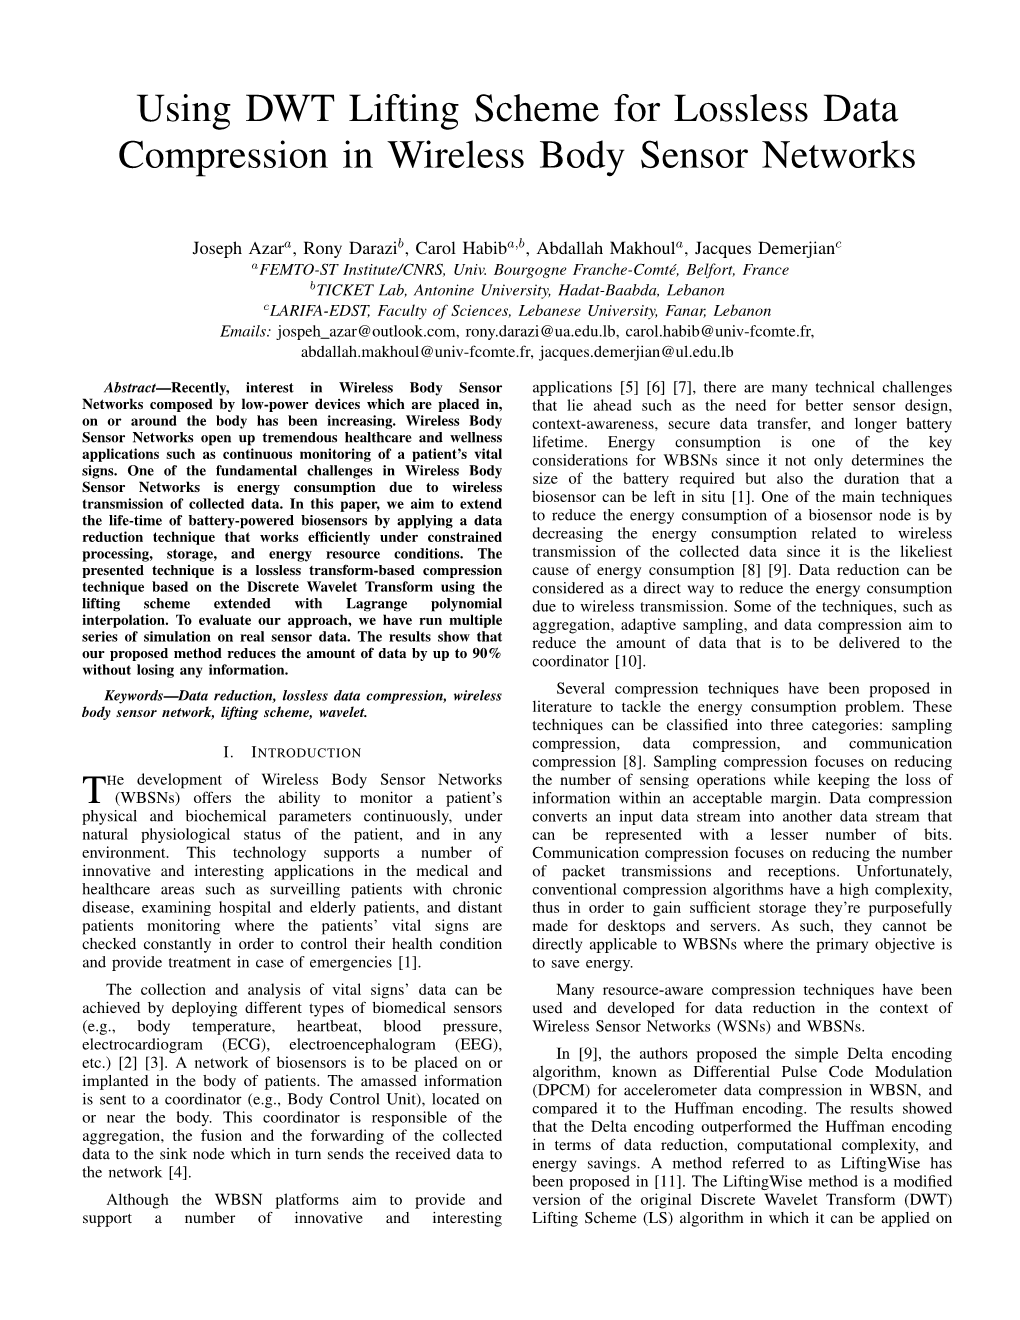 Using DWT Lifting Scheme for Lossless Data Compression in Wireless Body Sensor Networks